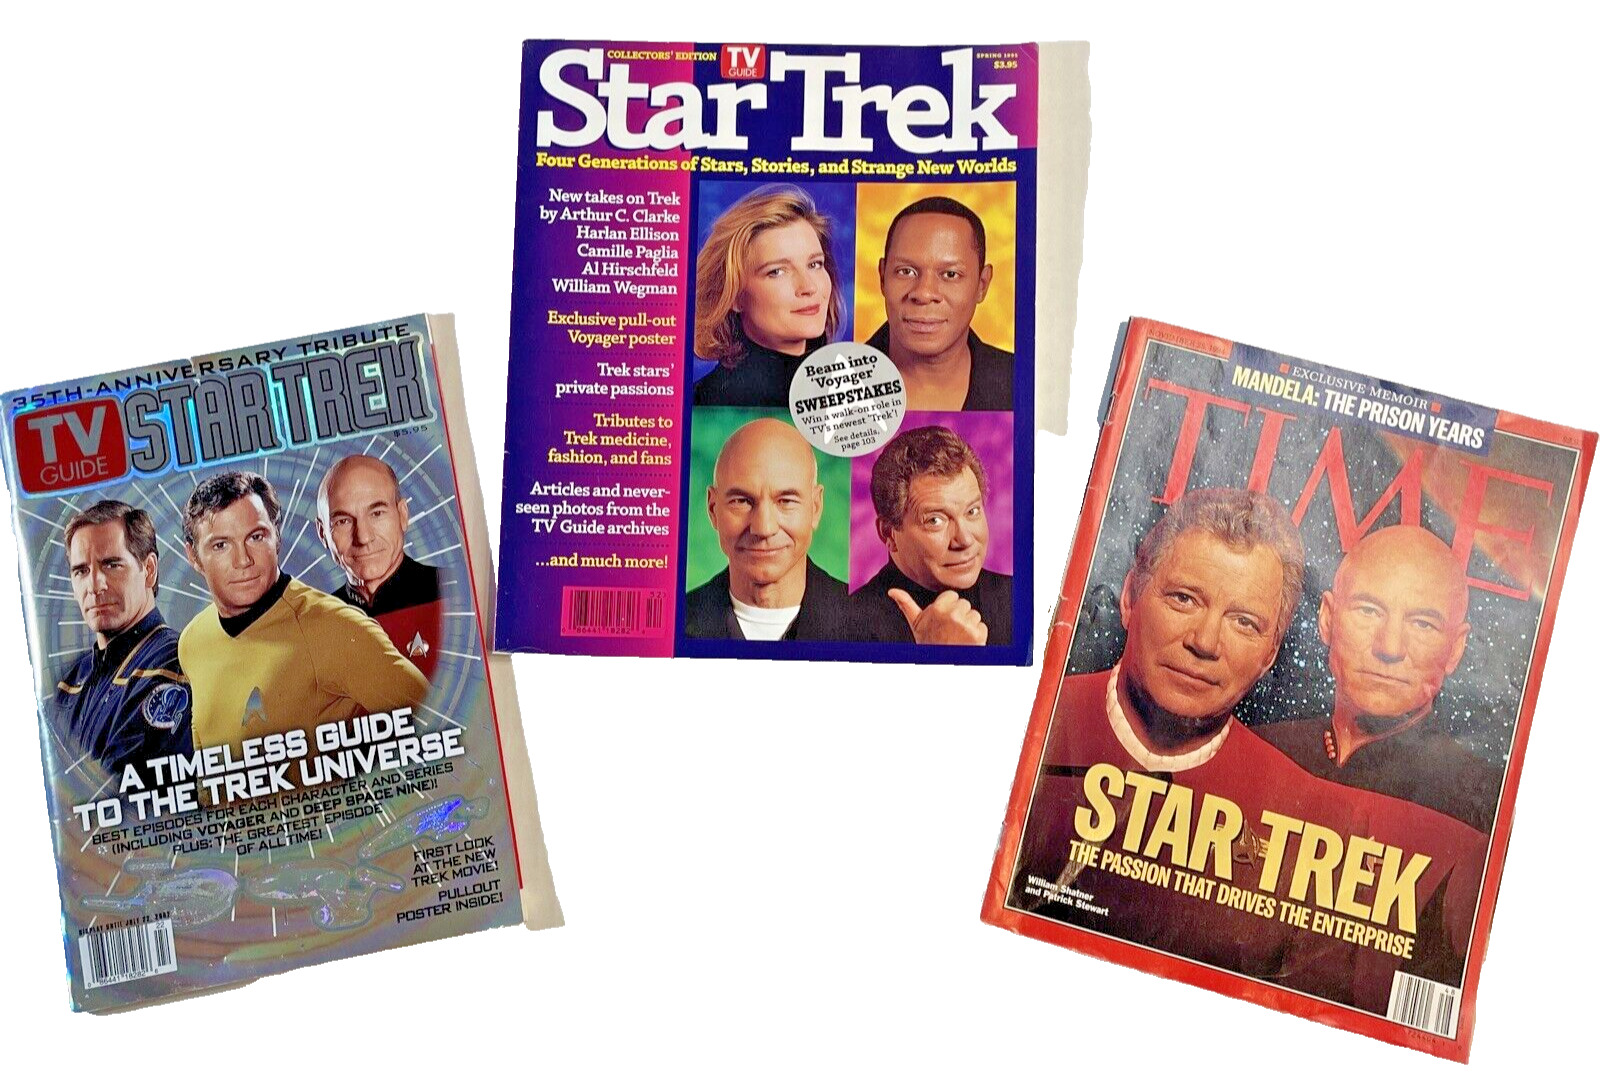 STAR TREK Vintage Magazine Covers Time & TV Guide( set Of 3) 1994, 1995 And 2002